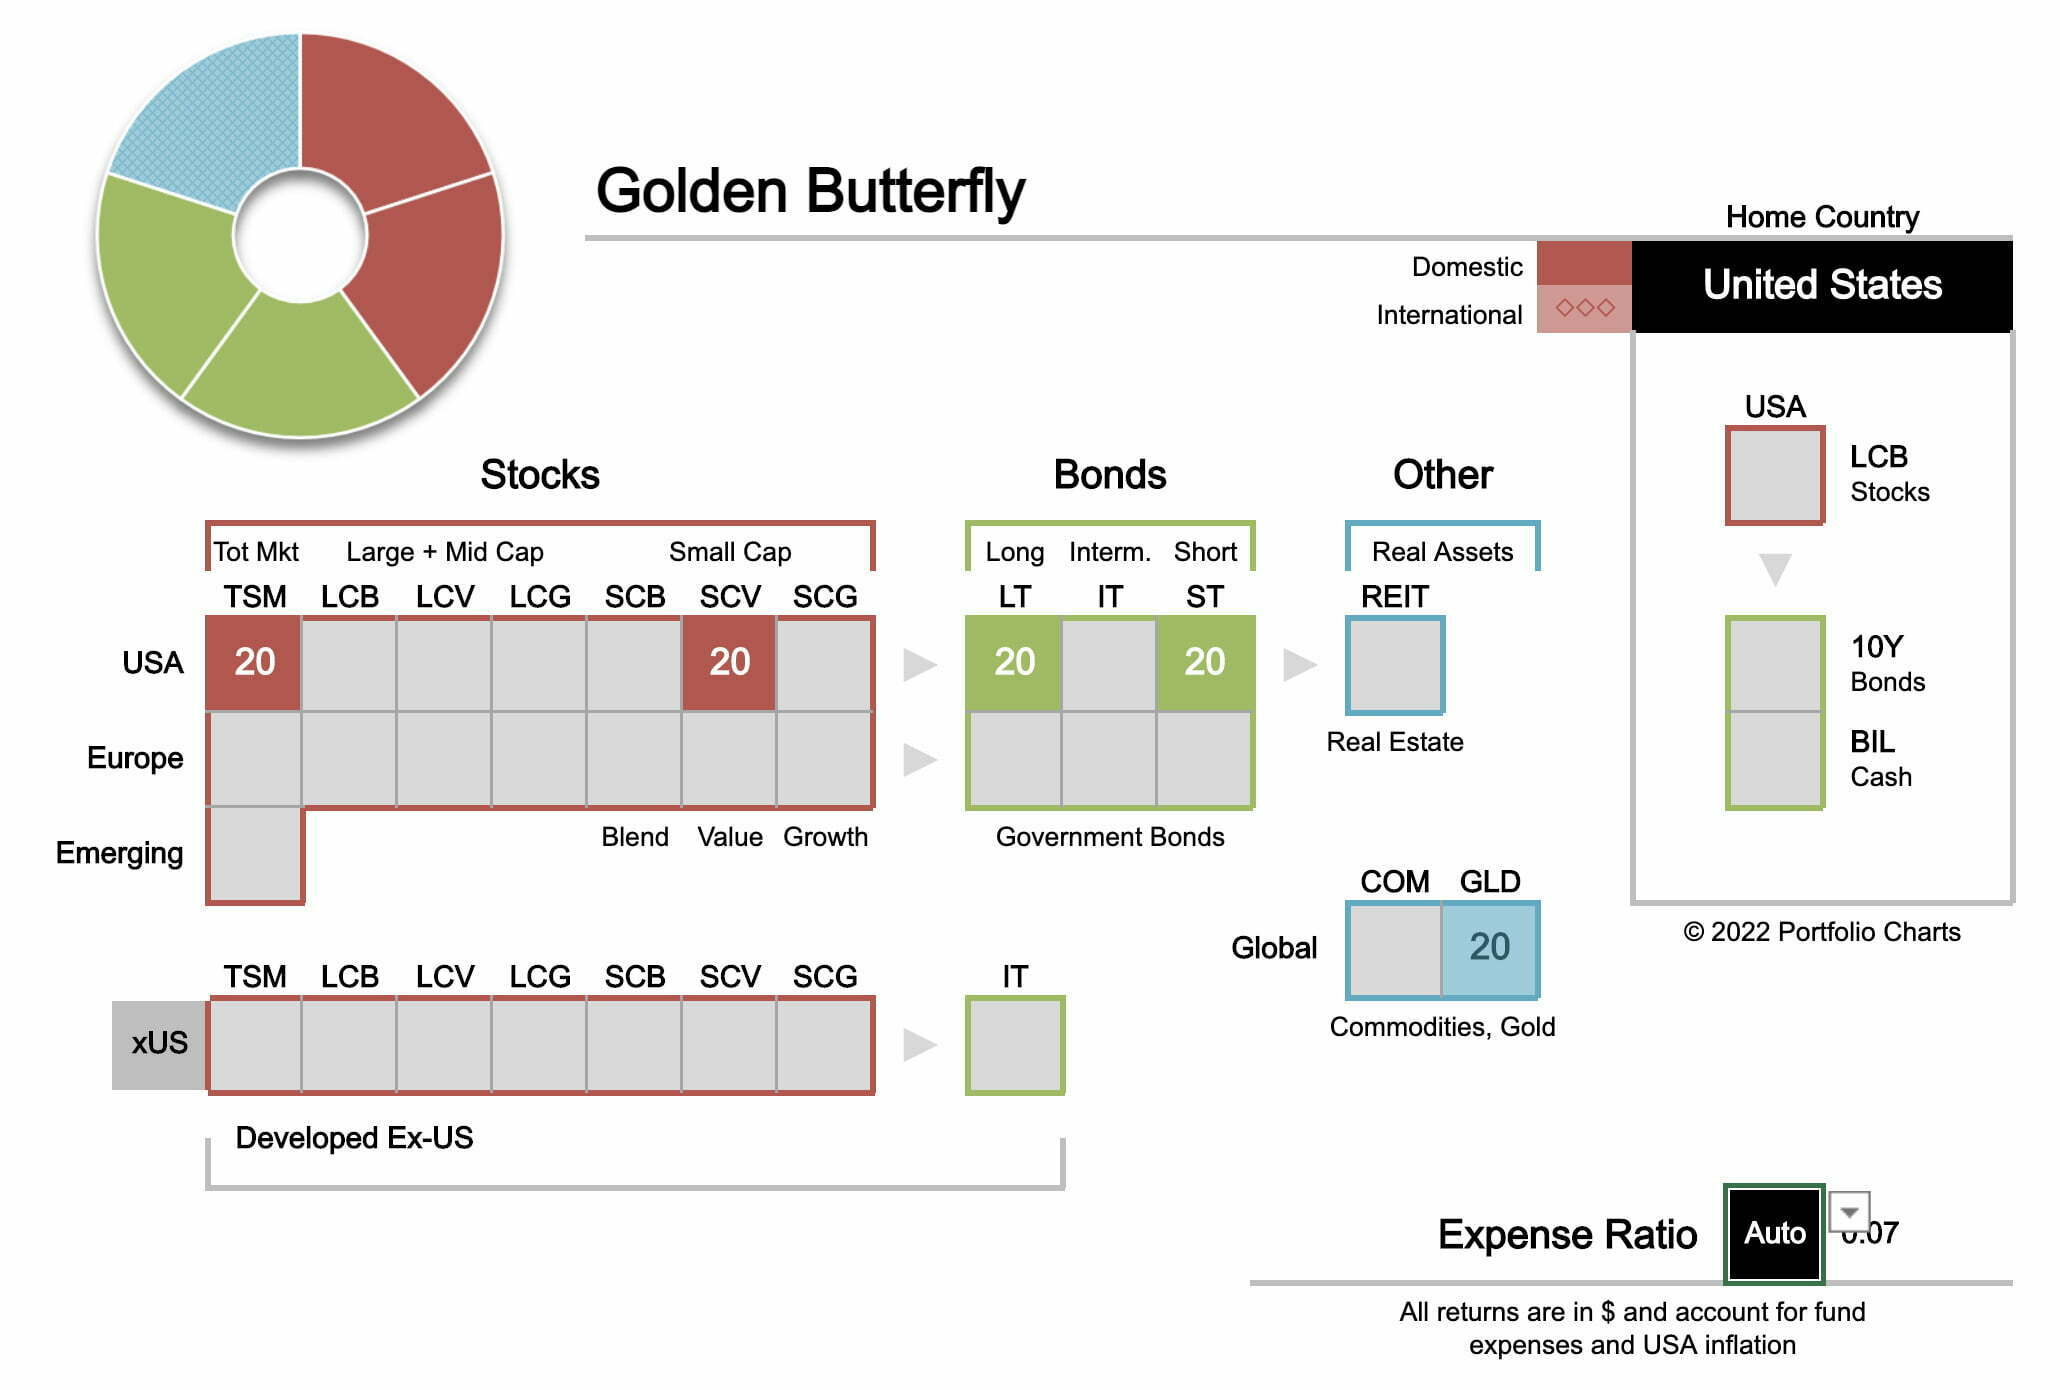 The Golden Butterfly Portfolio Asset Allocation from Tyler of Portfolio Charts